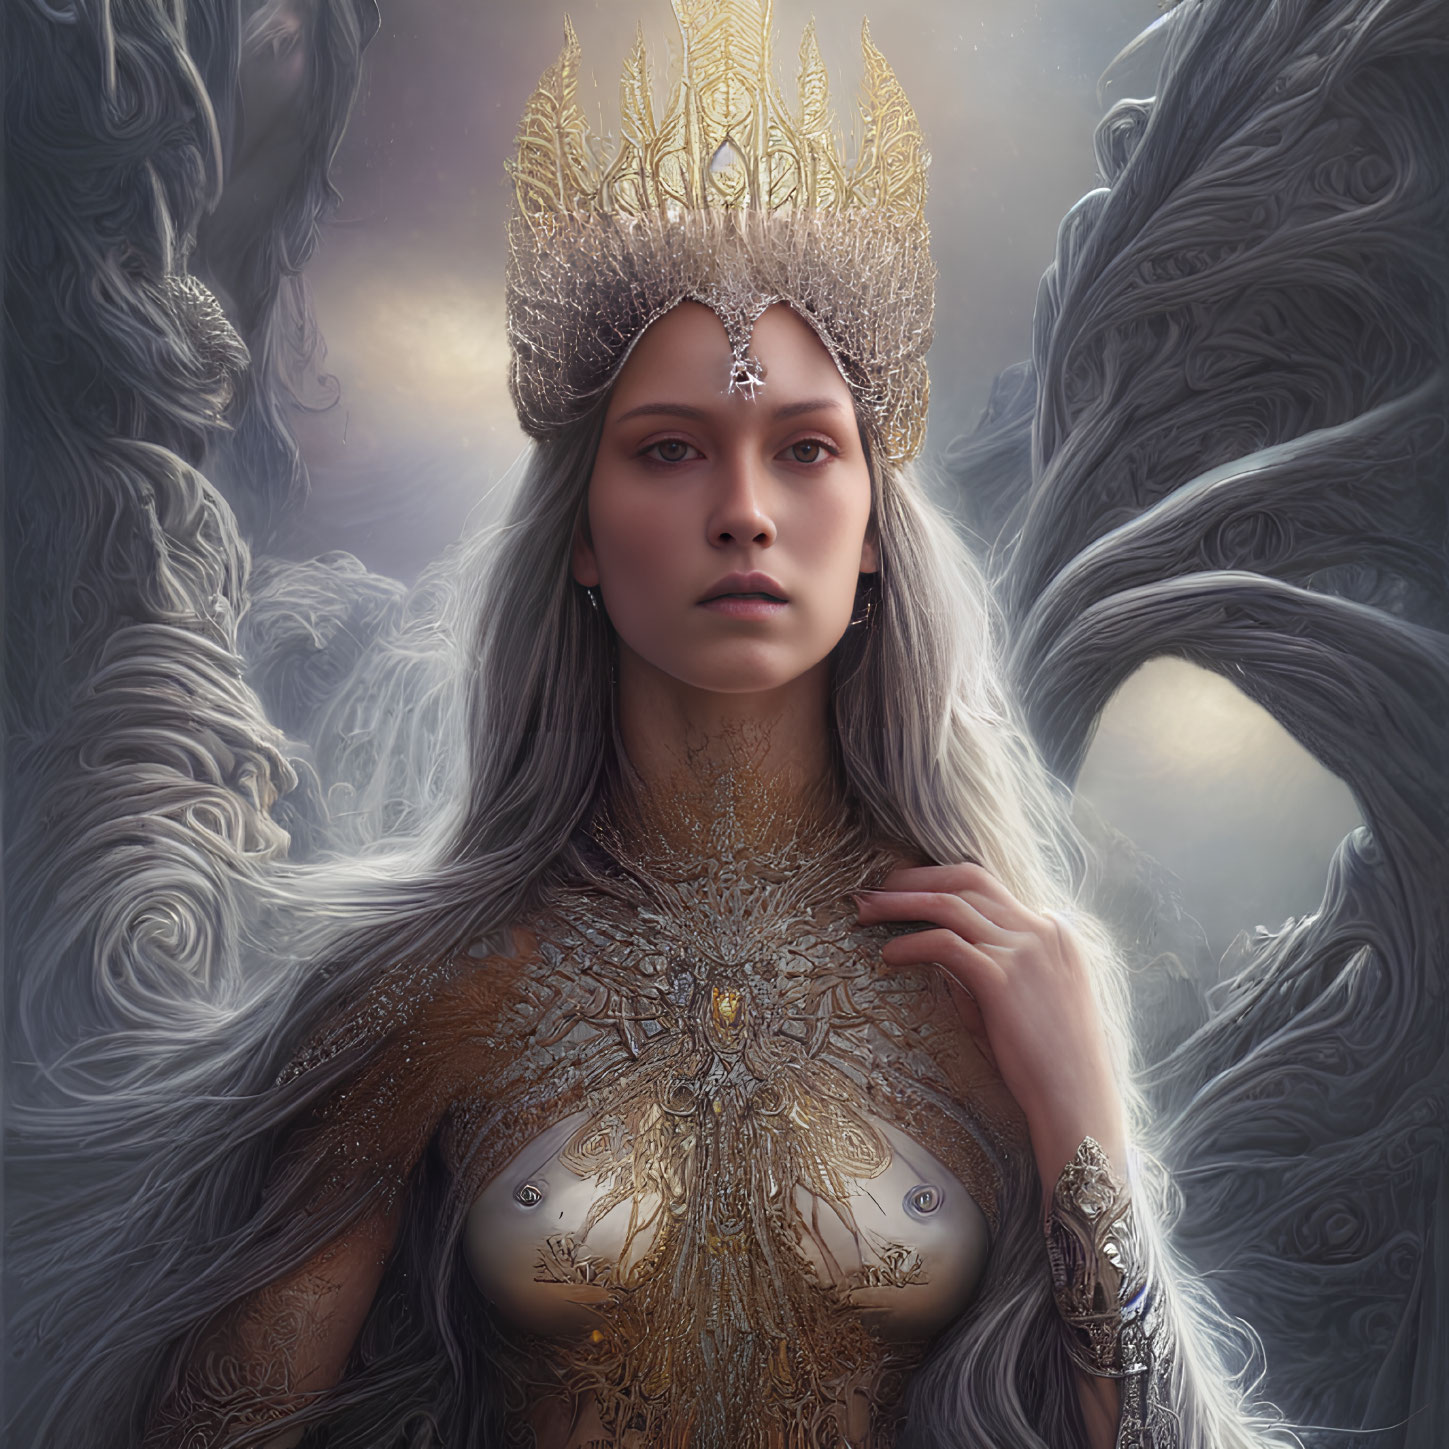 Detailed Gold Crown and Armor on Regal Woman in Ethereal Setting